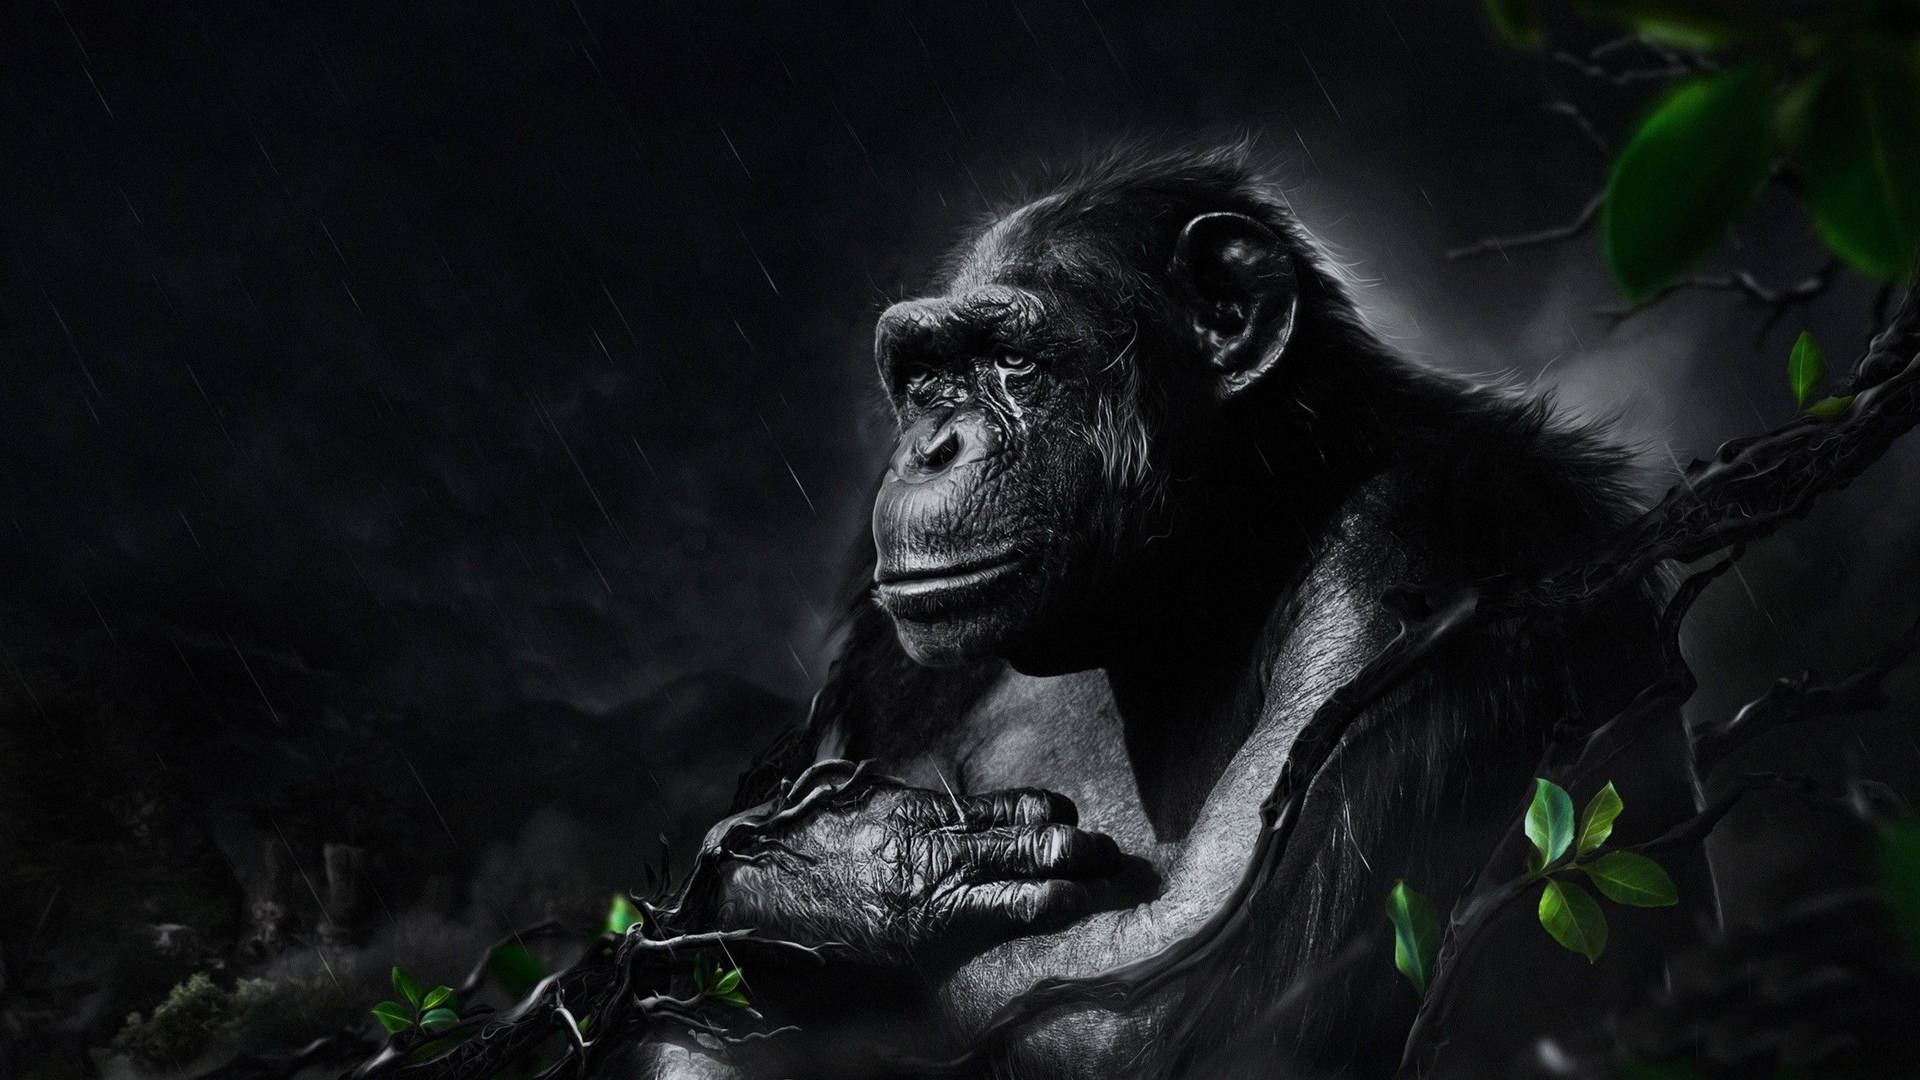 Black Monkey Lonely Painting Wallpaper